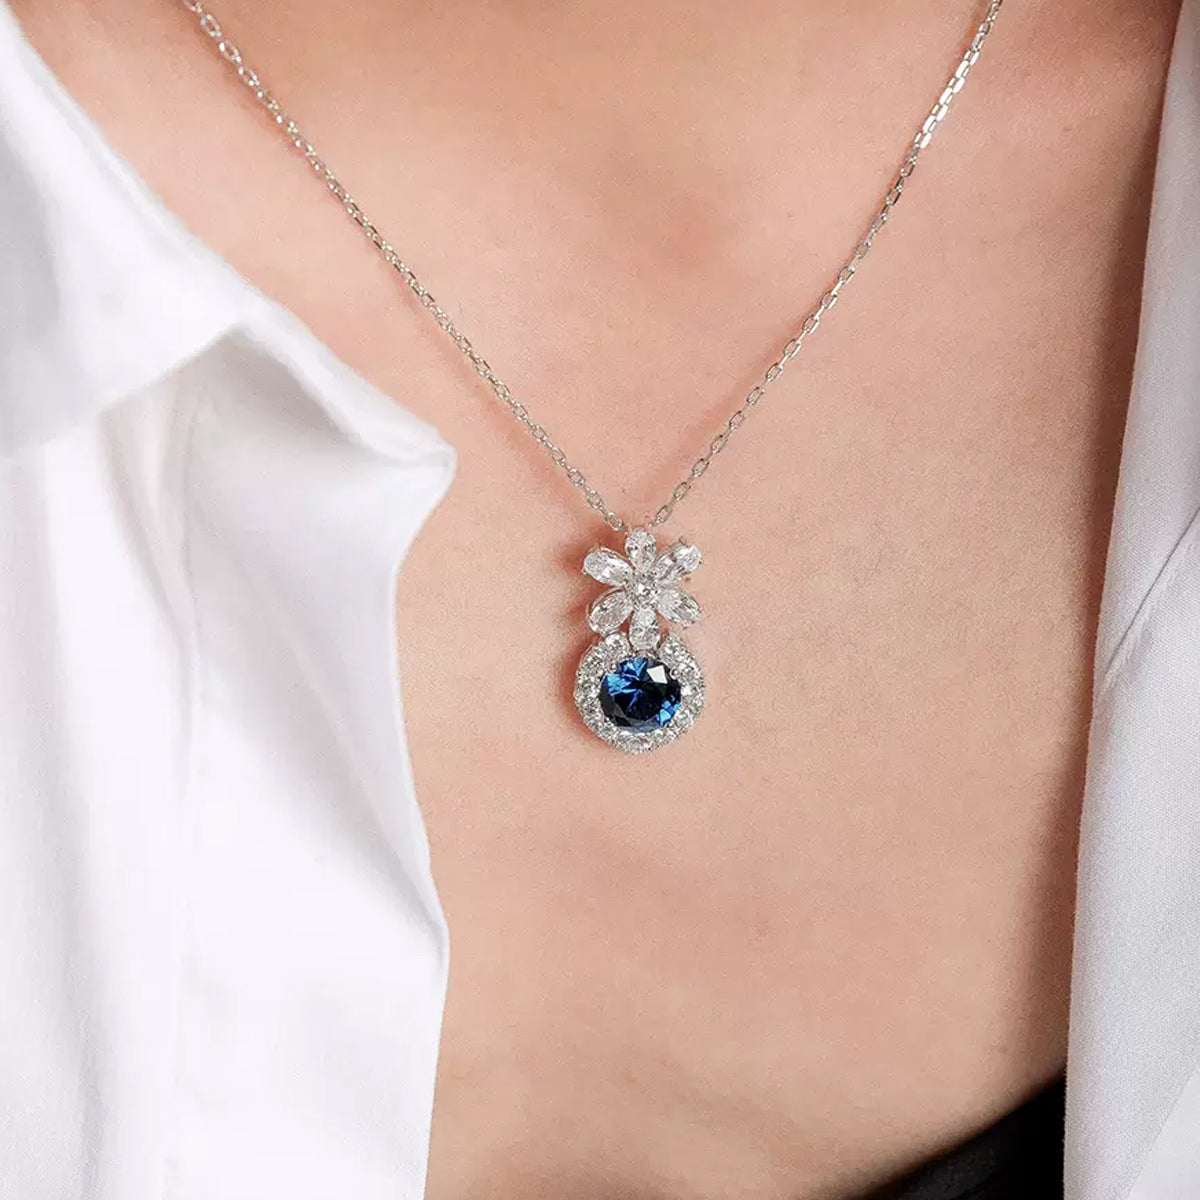 Siliice Jewelry - Sapphire Series -  Royal Blue Necklace Full of Diamonds with Clavicle Chain For Women